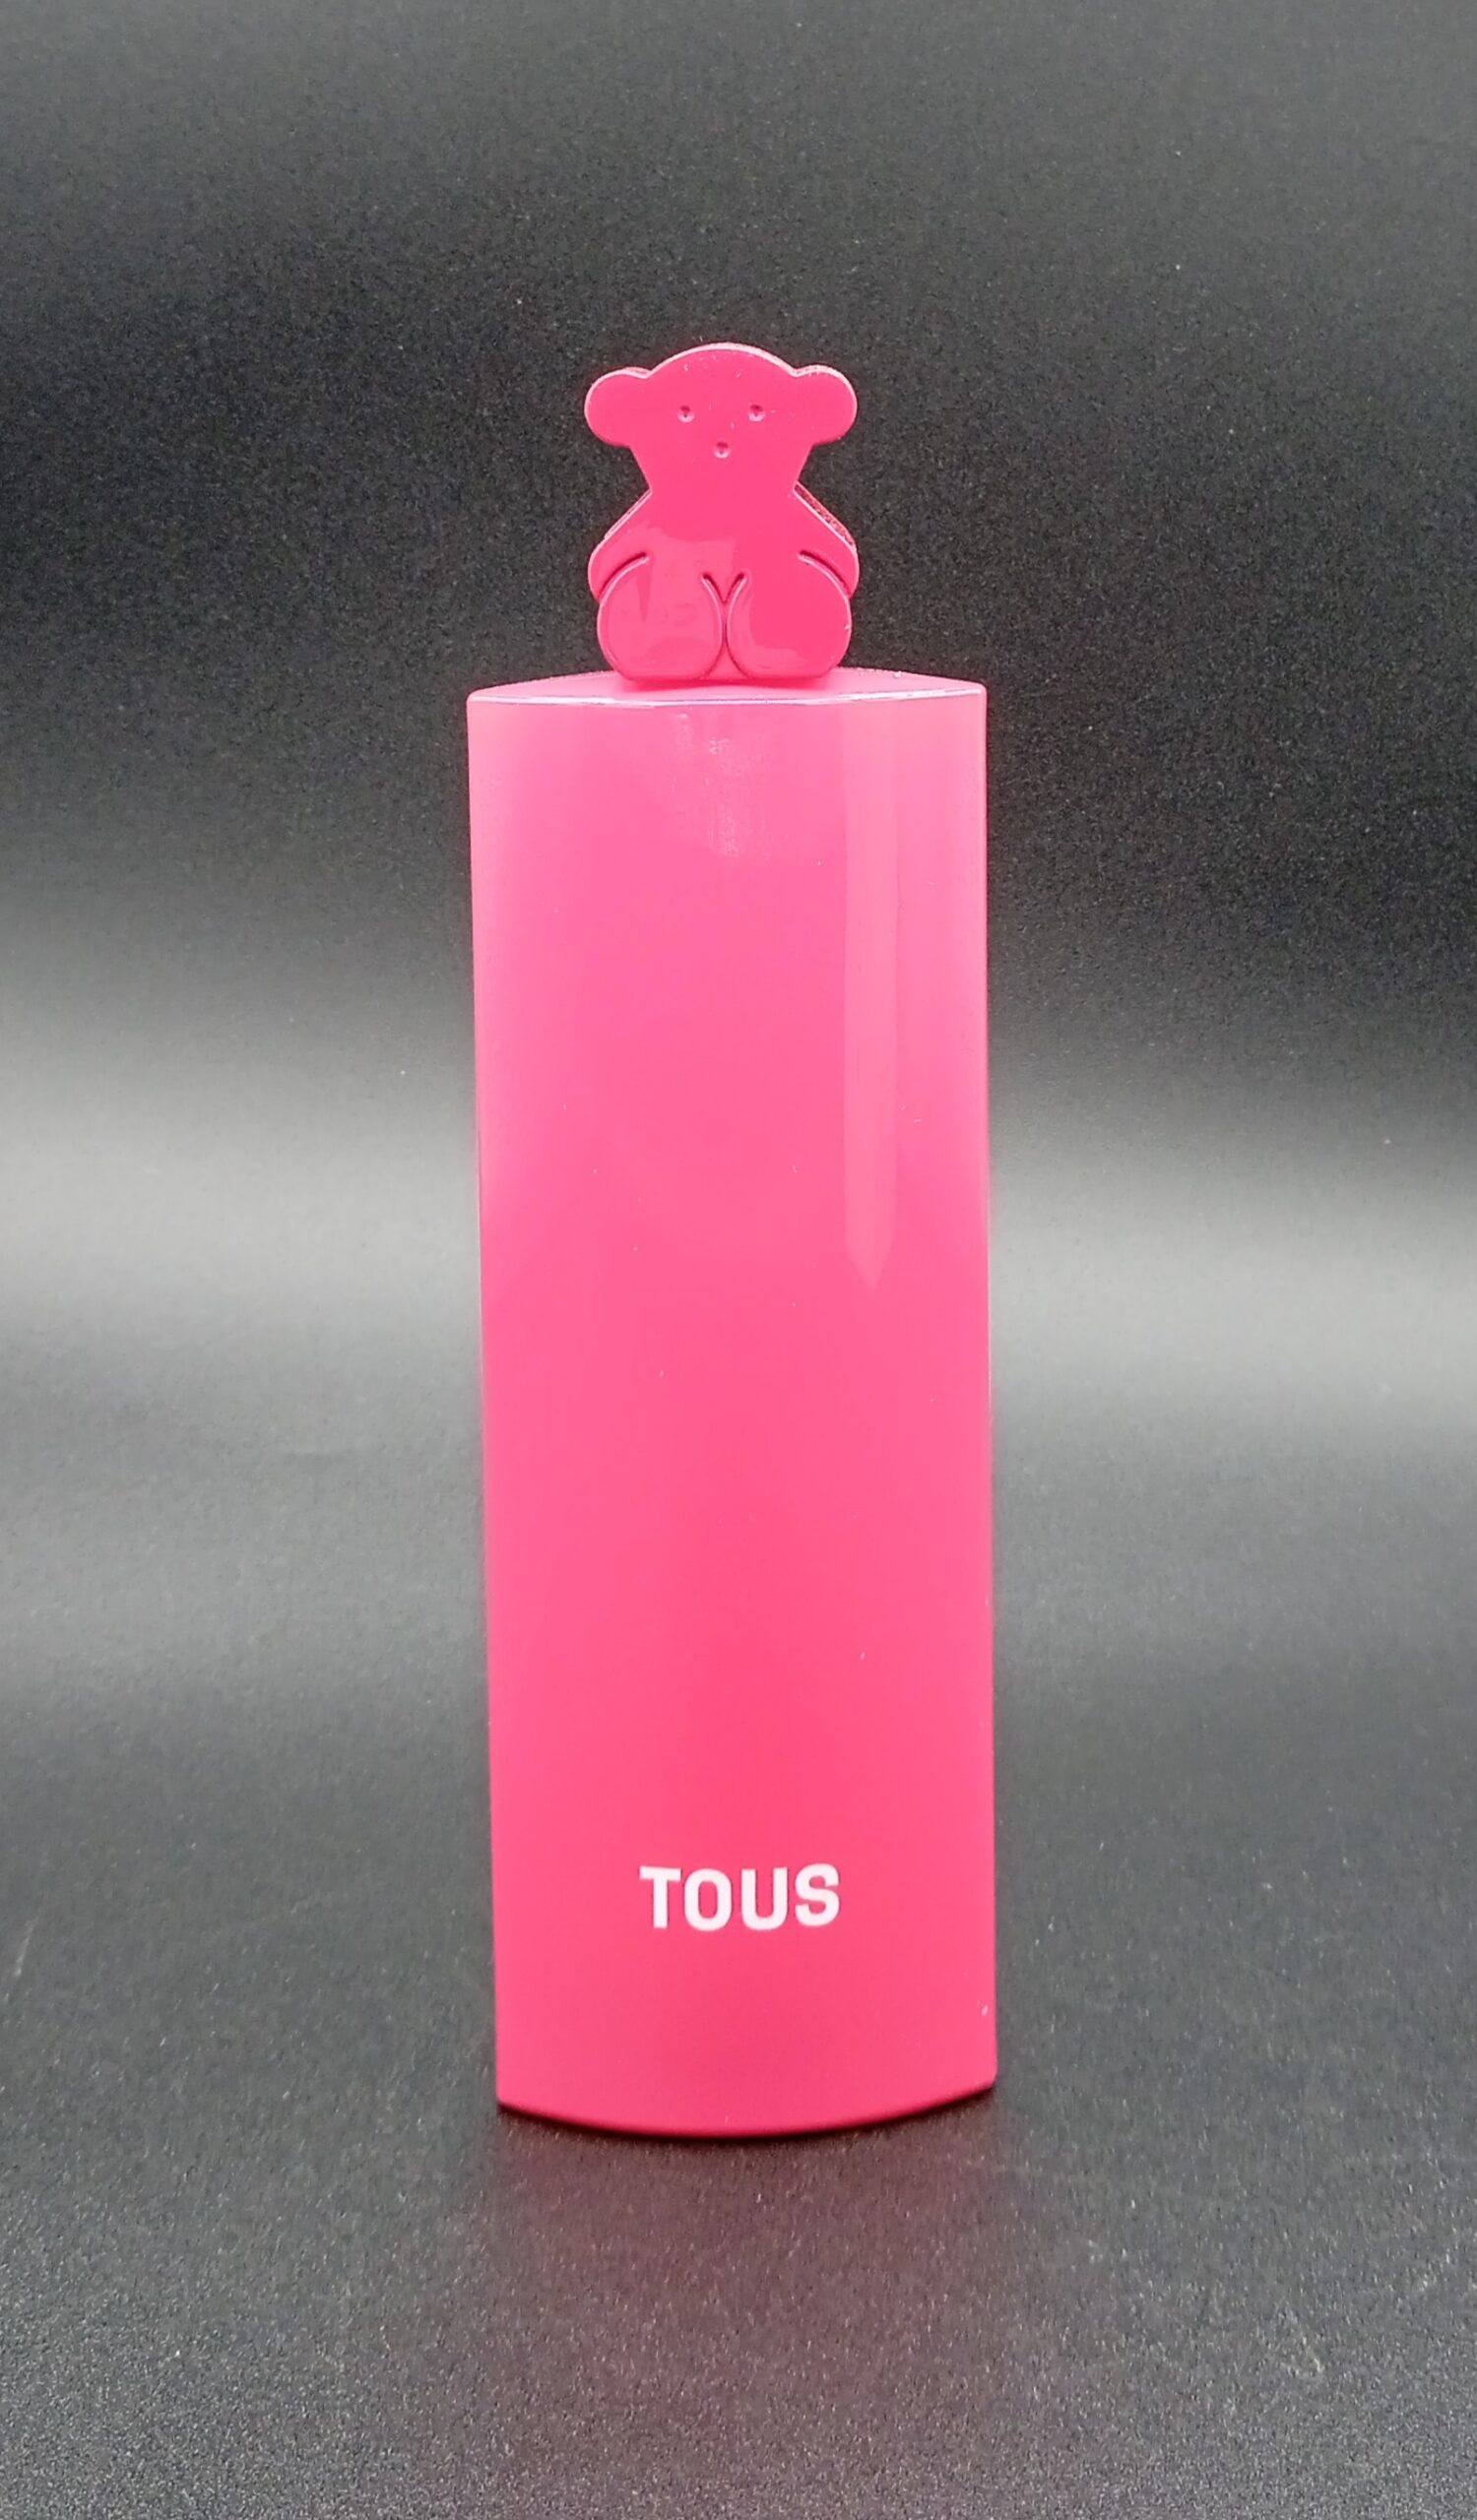 MORE MORE PINK EDT 50ML